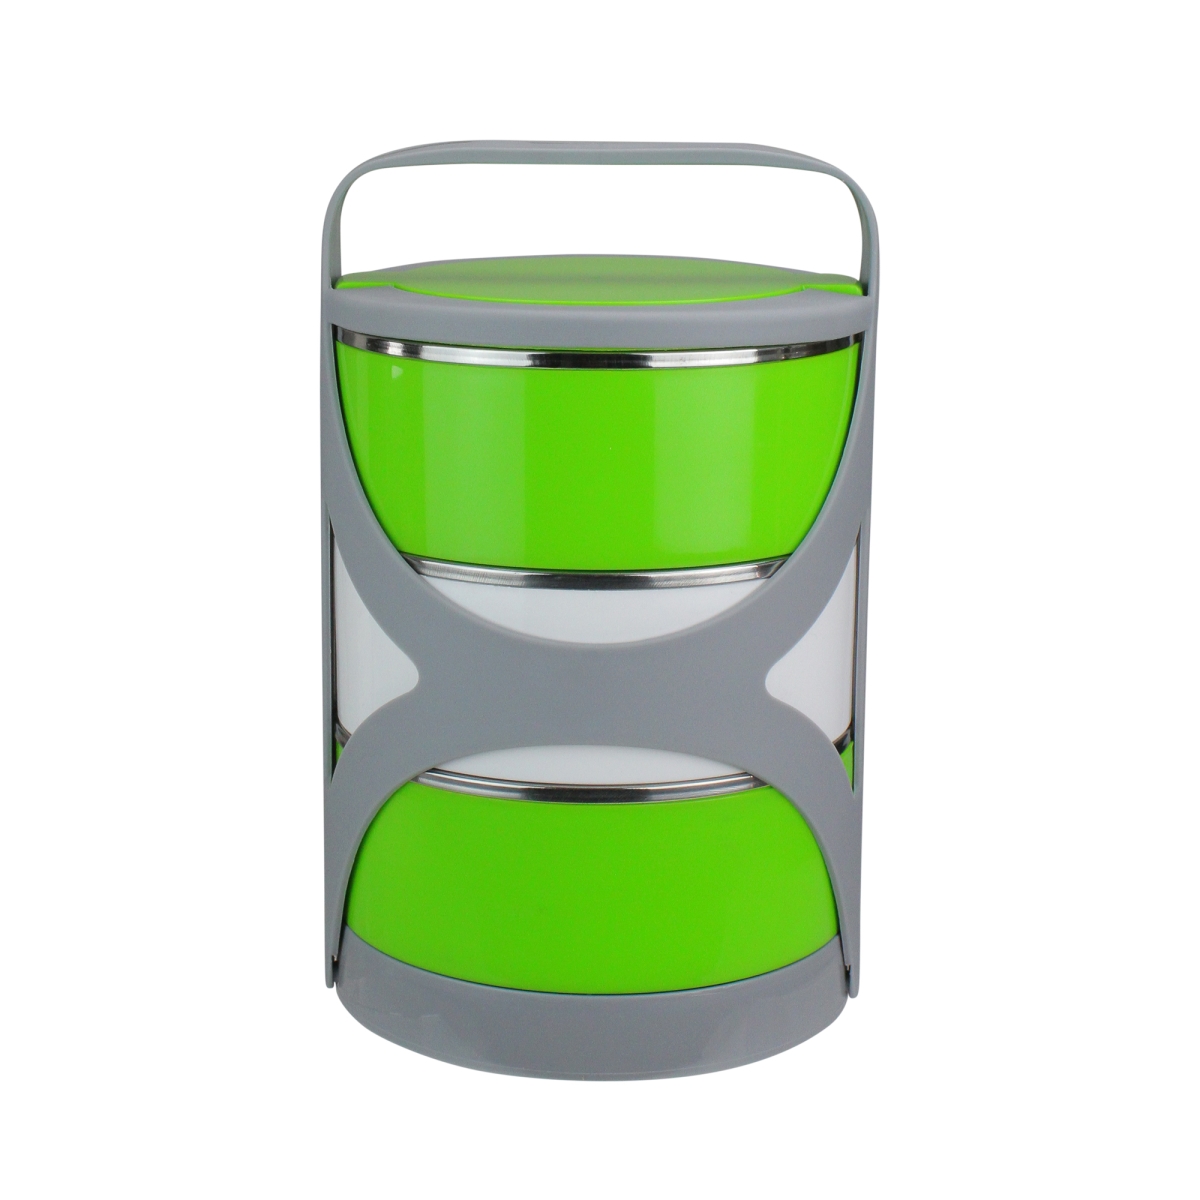 33537567 Stacking Food Storage Containers With Carrying Holder, Green & White